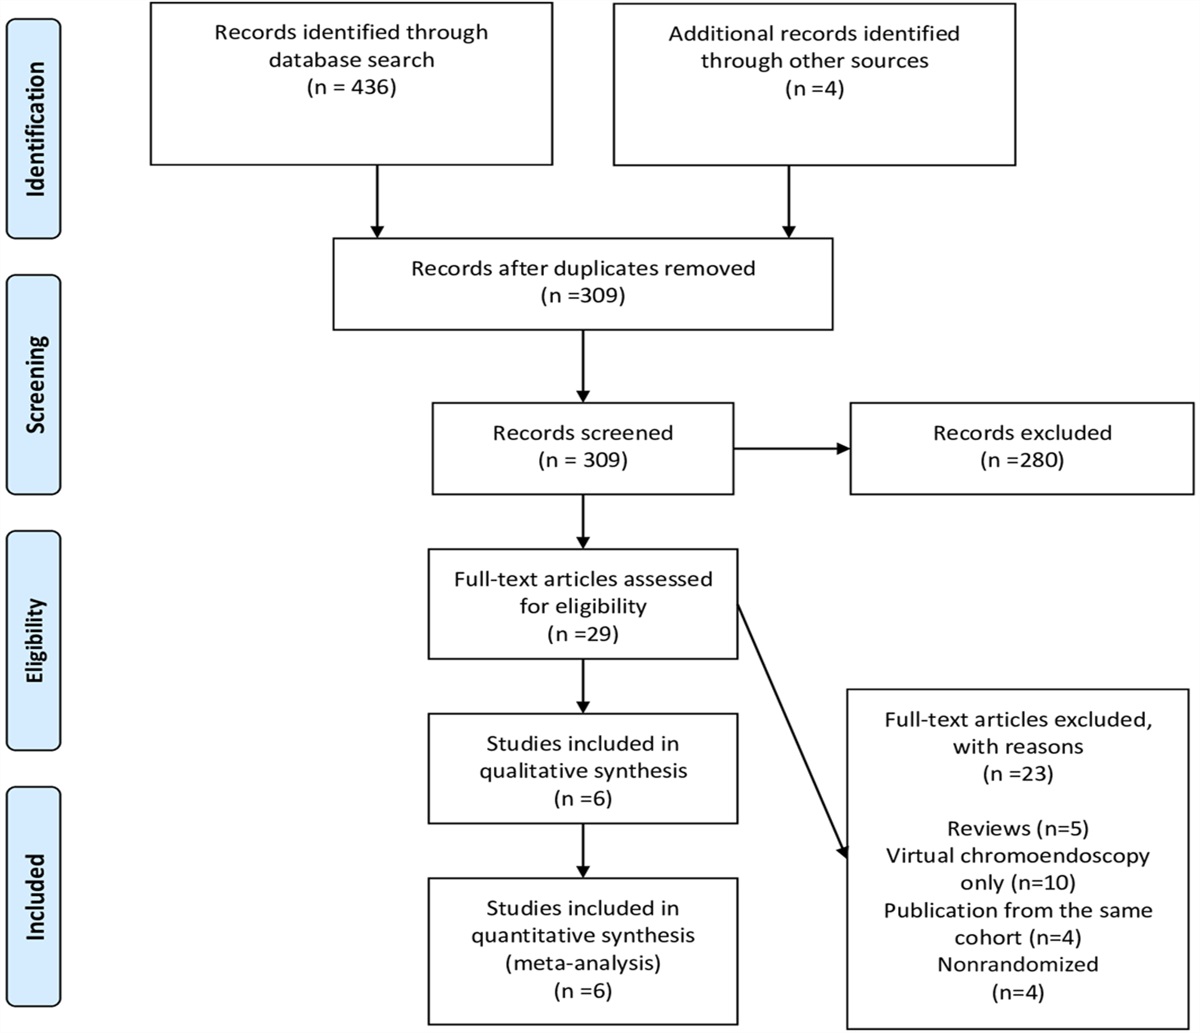 Dye Chromoendoscopy Outperforms High-Definition White Light Endoscopy in Dysplasia Detection for Patients With Inflammatory Bowel Disease: An Updated Meta-Analysis of Randomized Controlled Trials